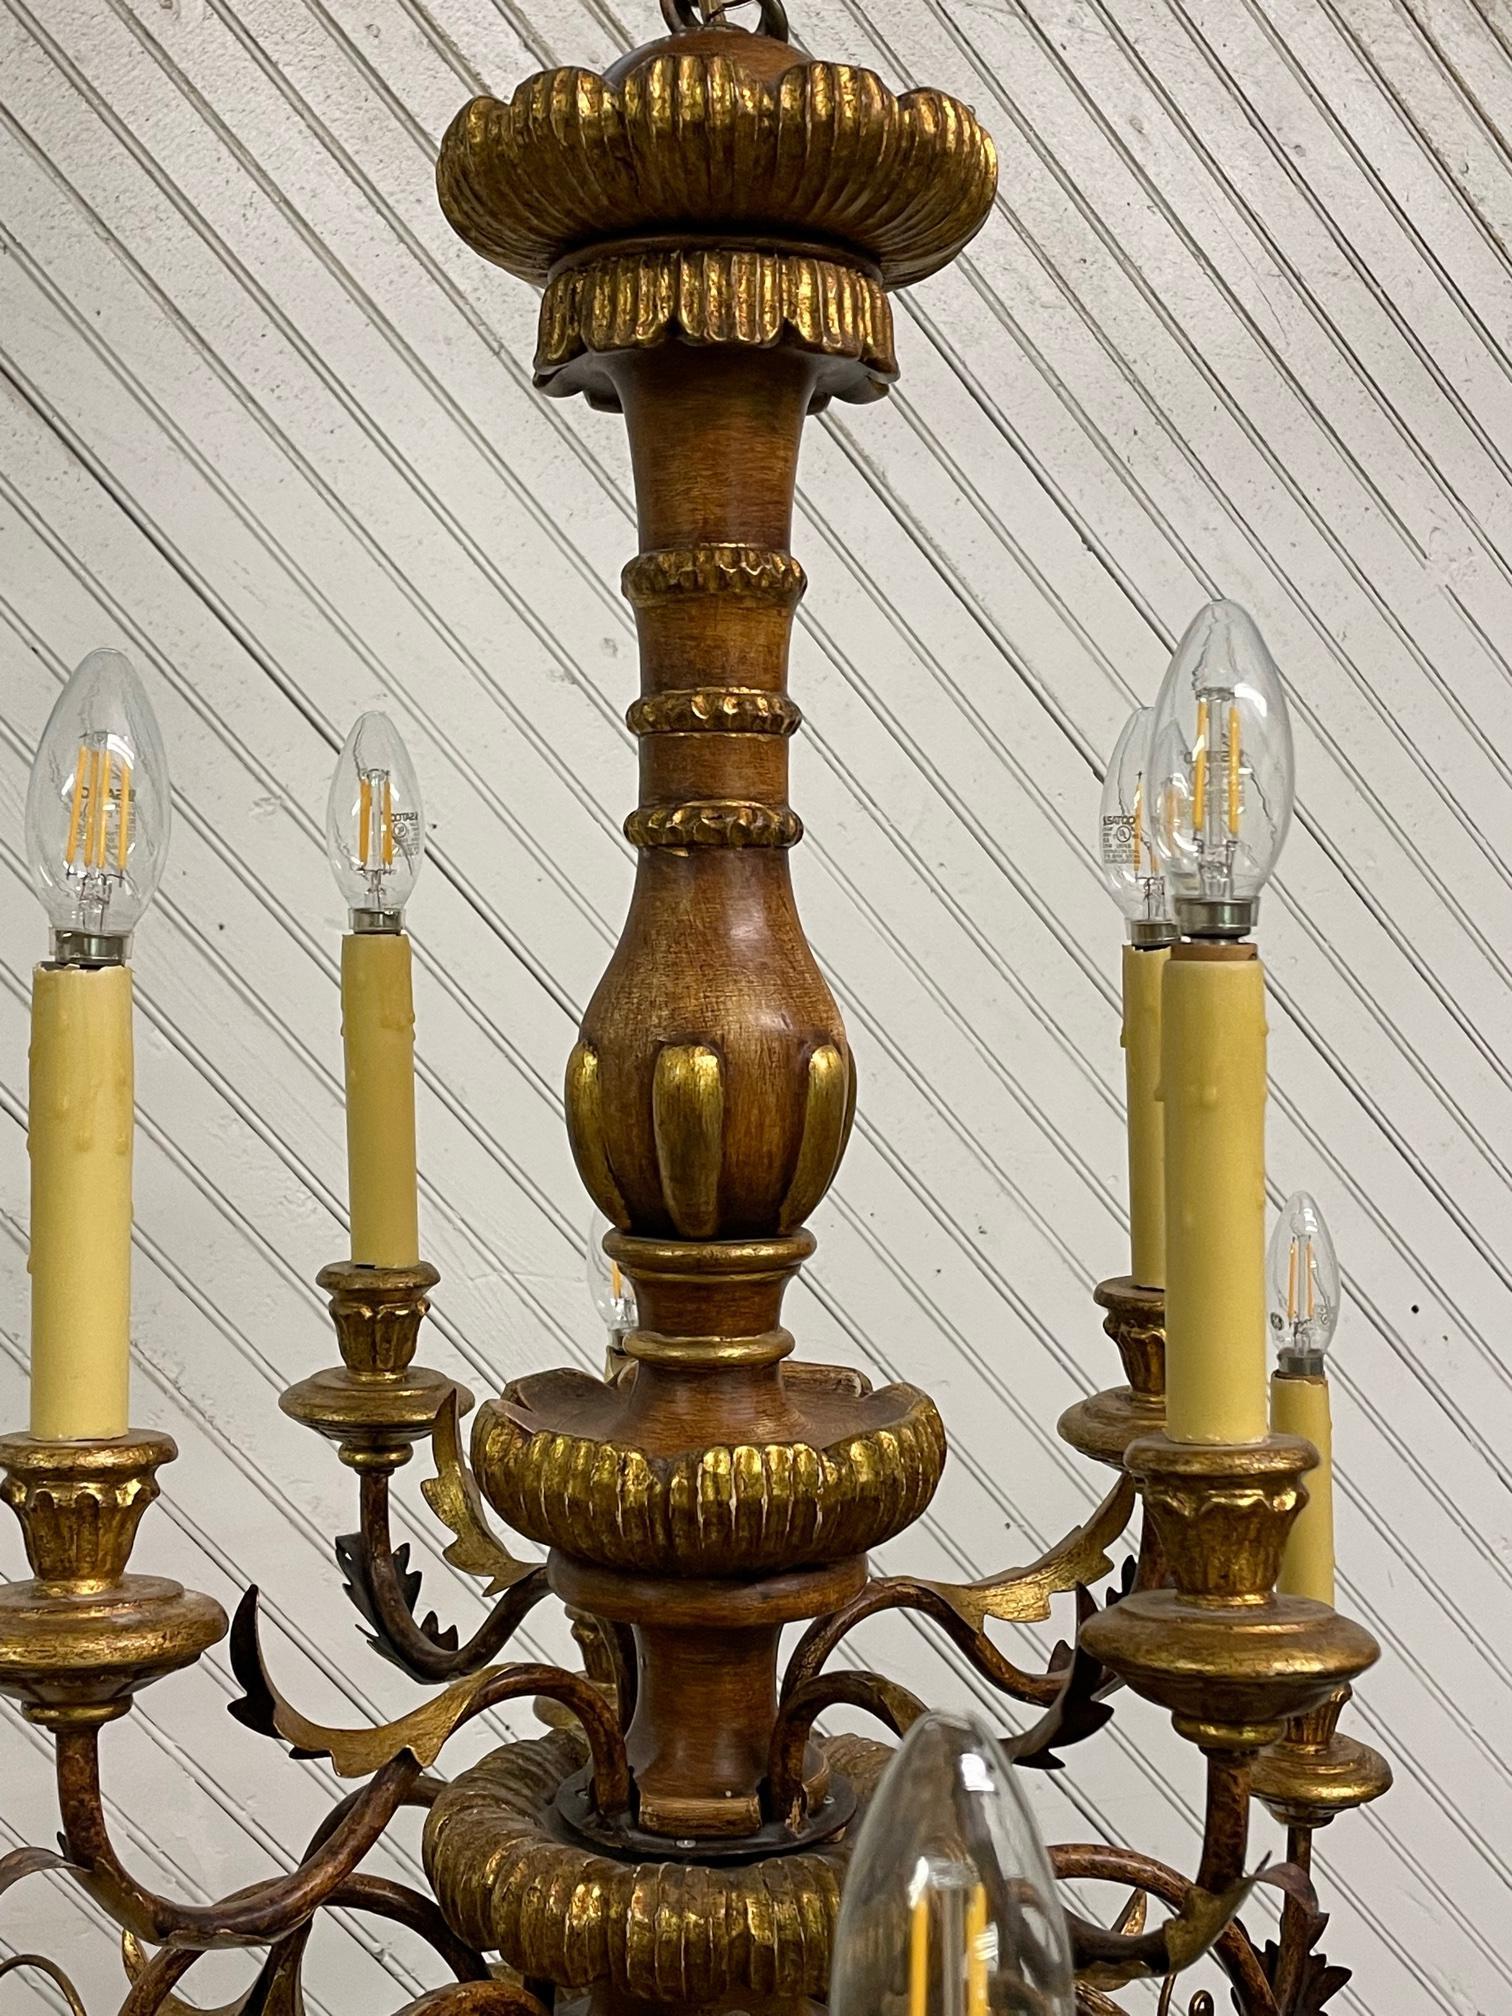 Large 12-arm chandelier features two levels, gold leaf detailing, and tole metal acanthus leaf accents. Good condition with imperfections consistent with age. Some candle sleeves show cracks along top edge. May exhibit scuffs, marks, or wear, see